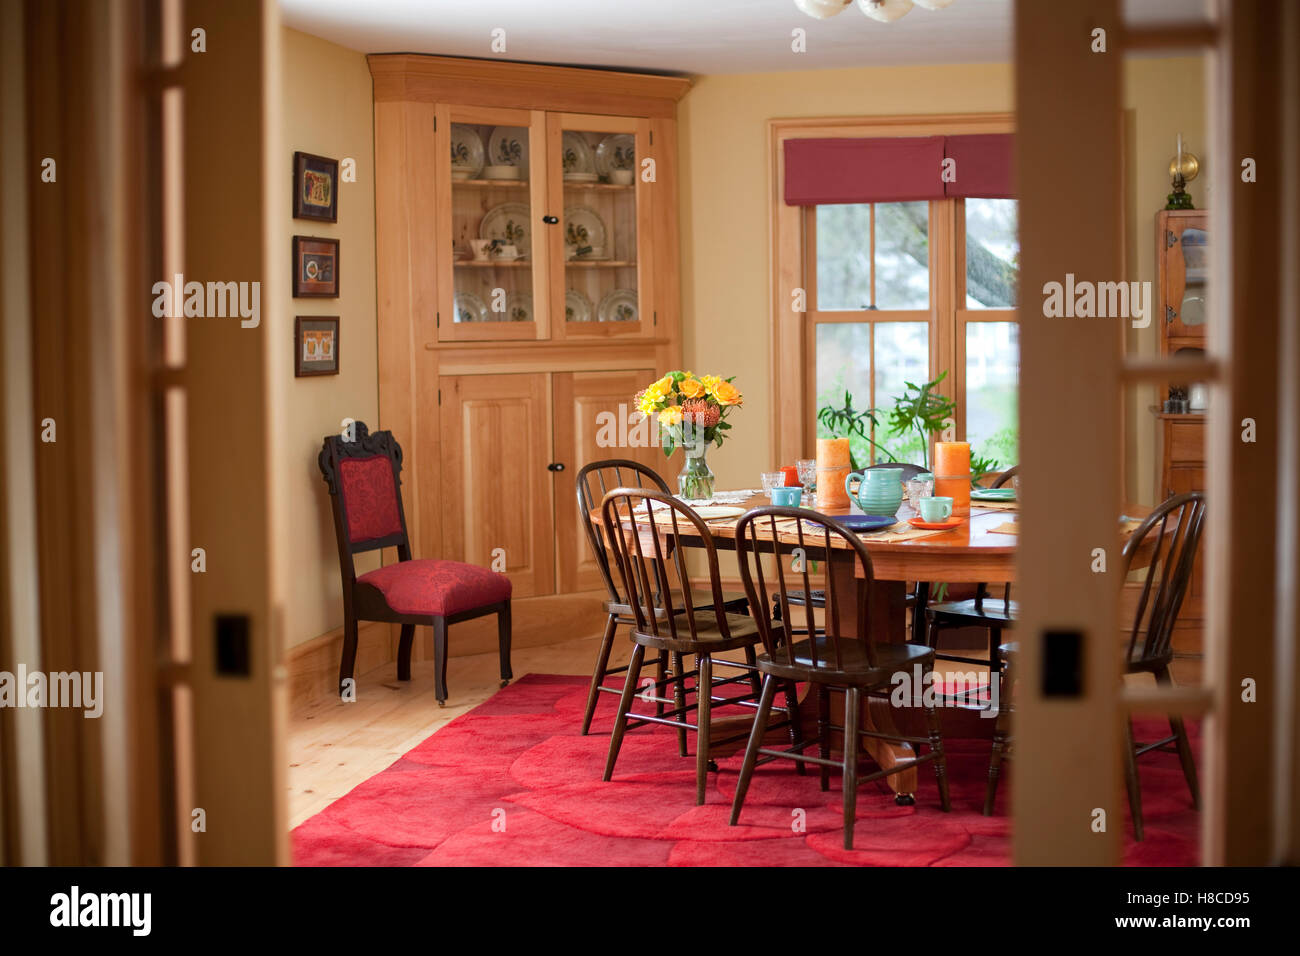 Dining room with set table, Inn at Gothic Eves, Trumansburg, New York, USA. Stock Photo